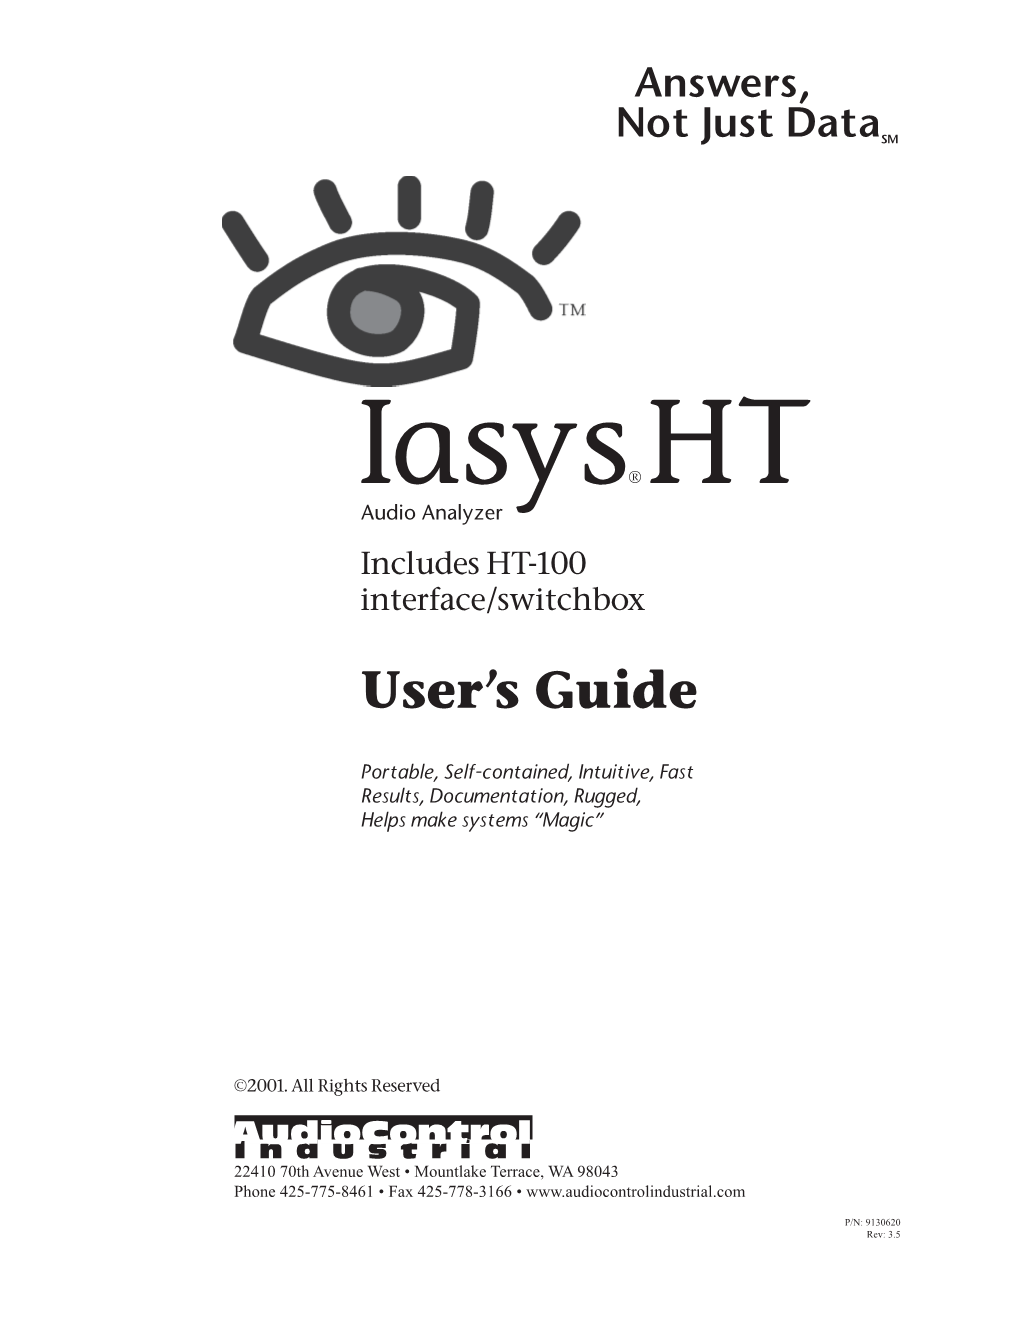 Iasys HT Overview What Iasys HT Does